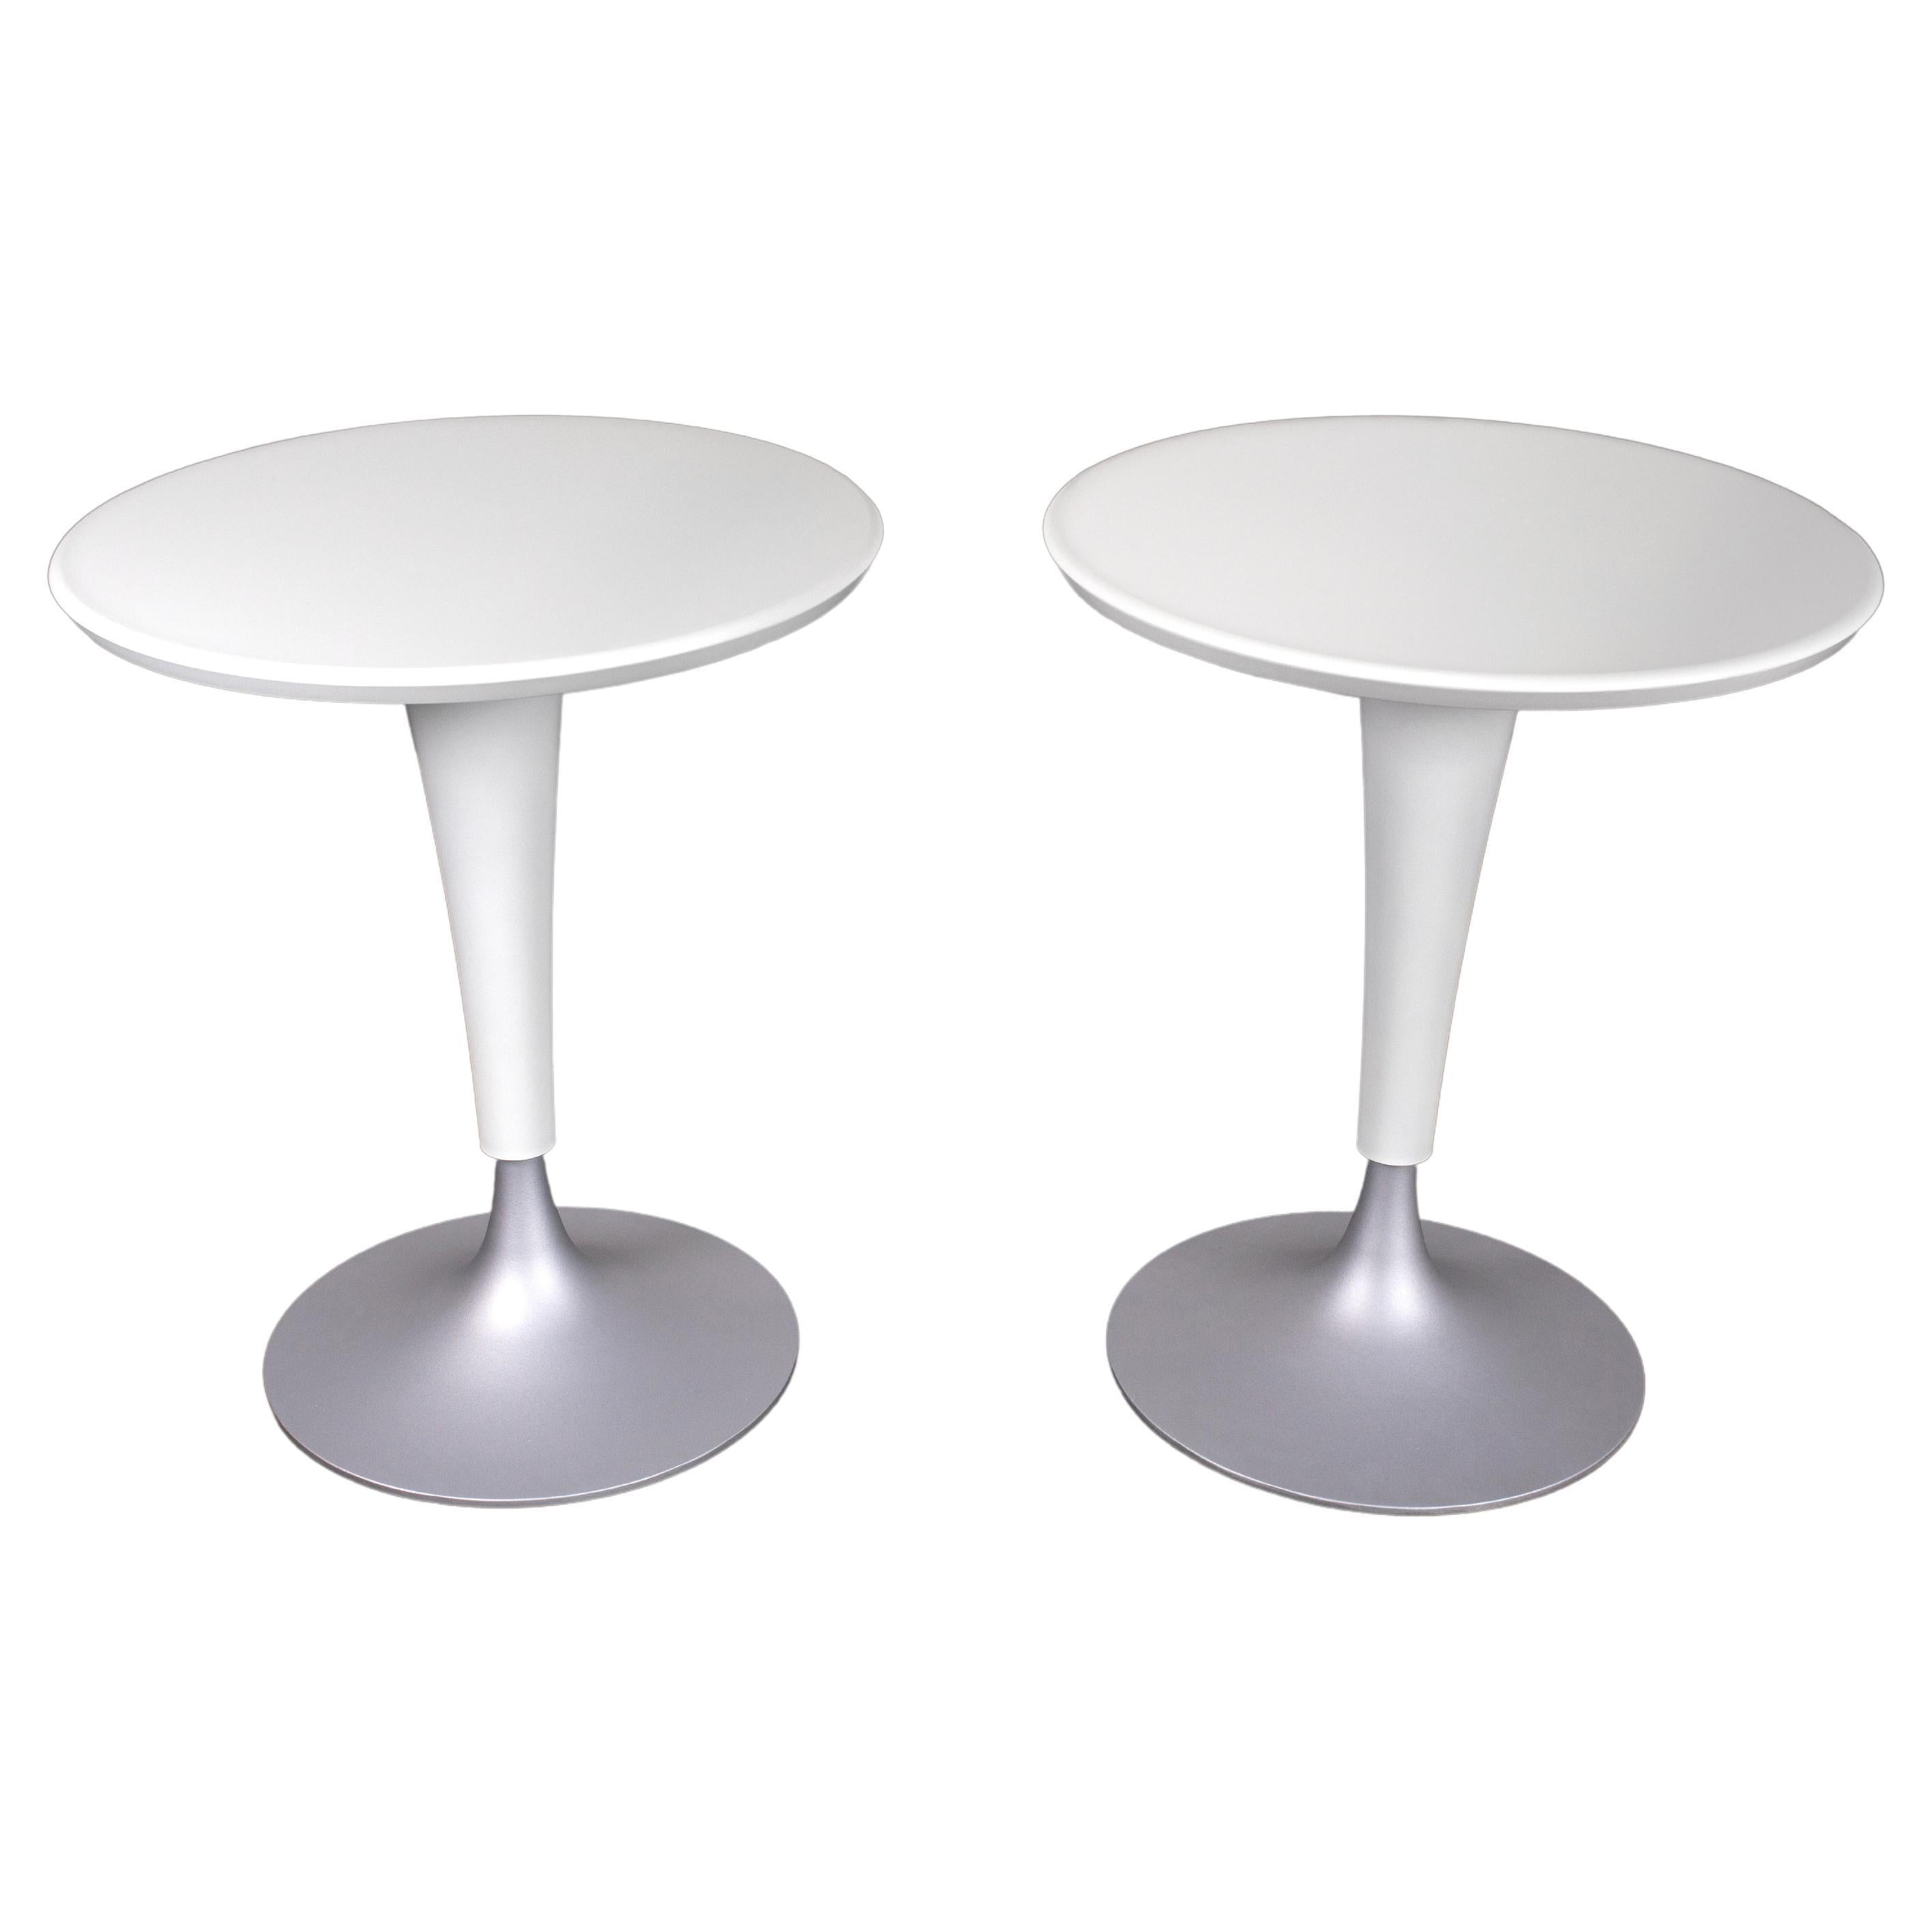 Philippe Starck In/Outdoor Round White Tulip Bar Tables "DR.NA" for Driade